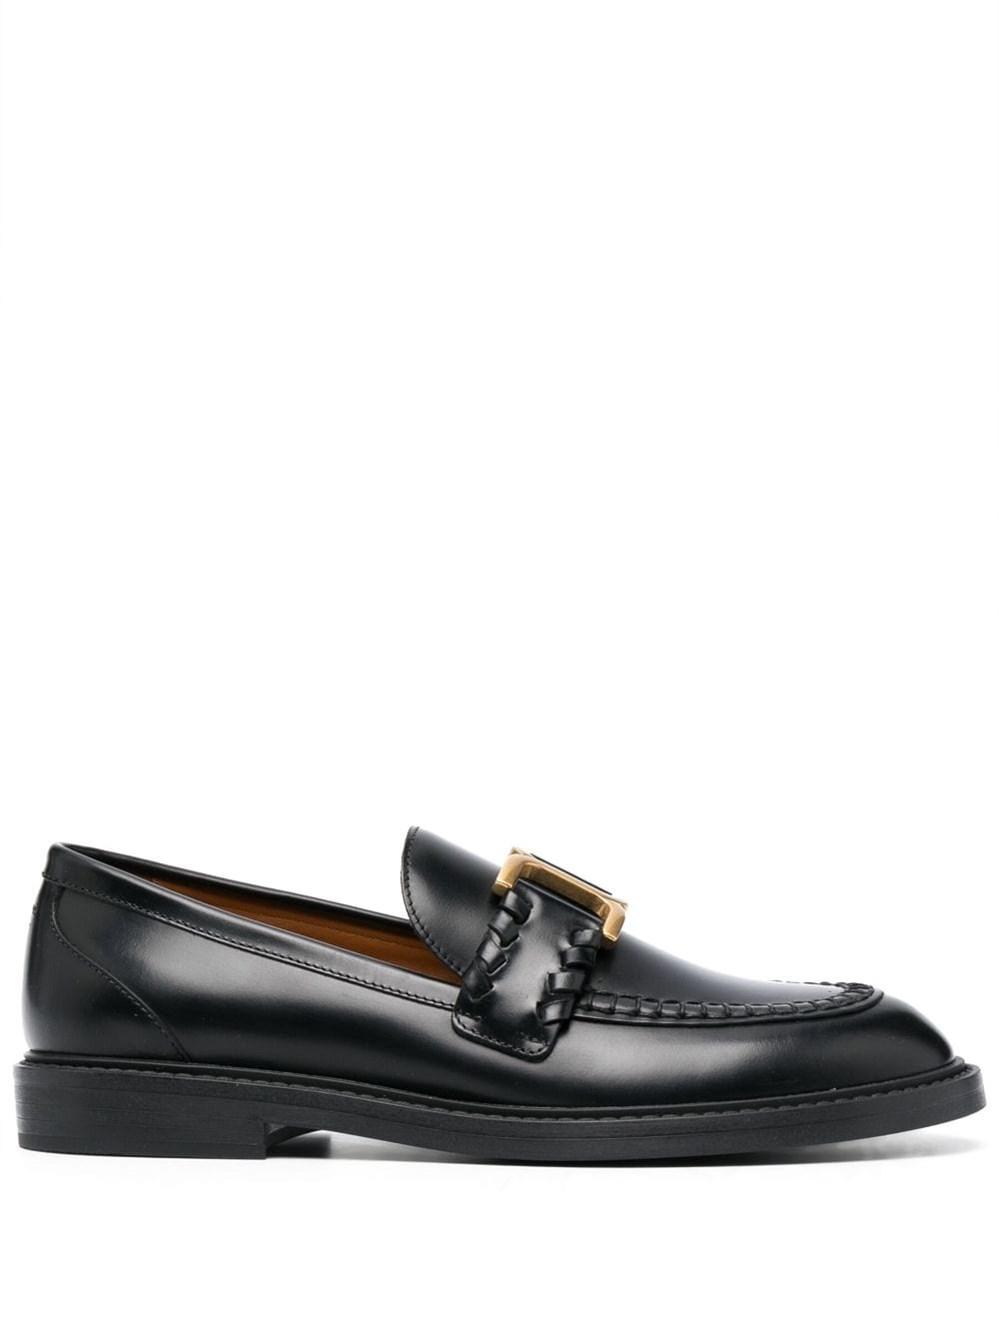 Chloé Marcie Loafers in Black | Lyst